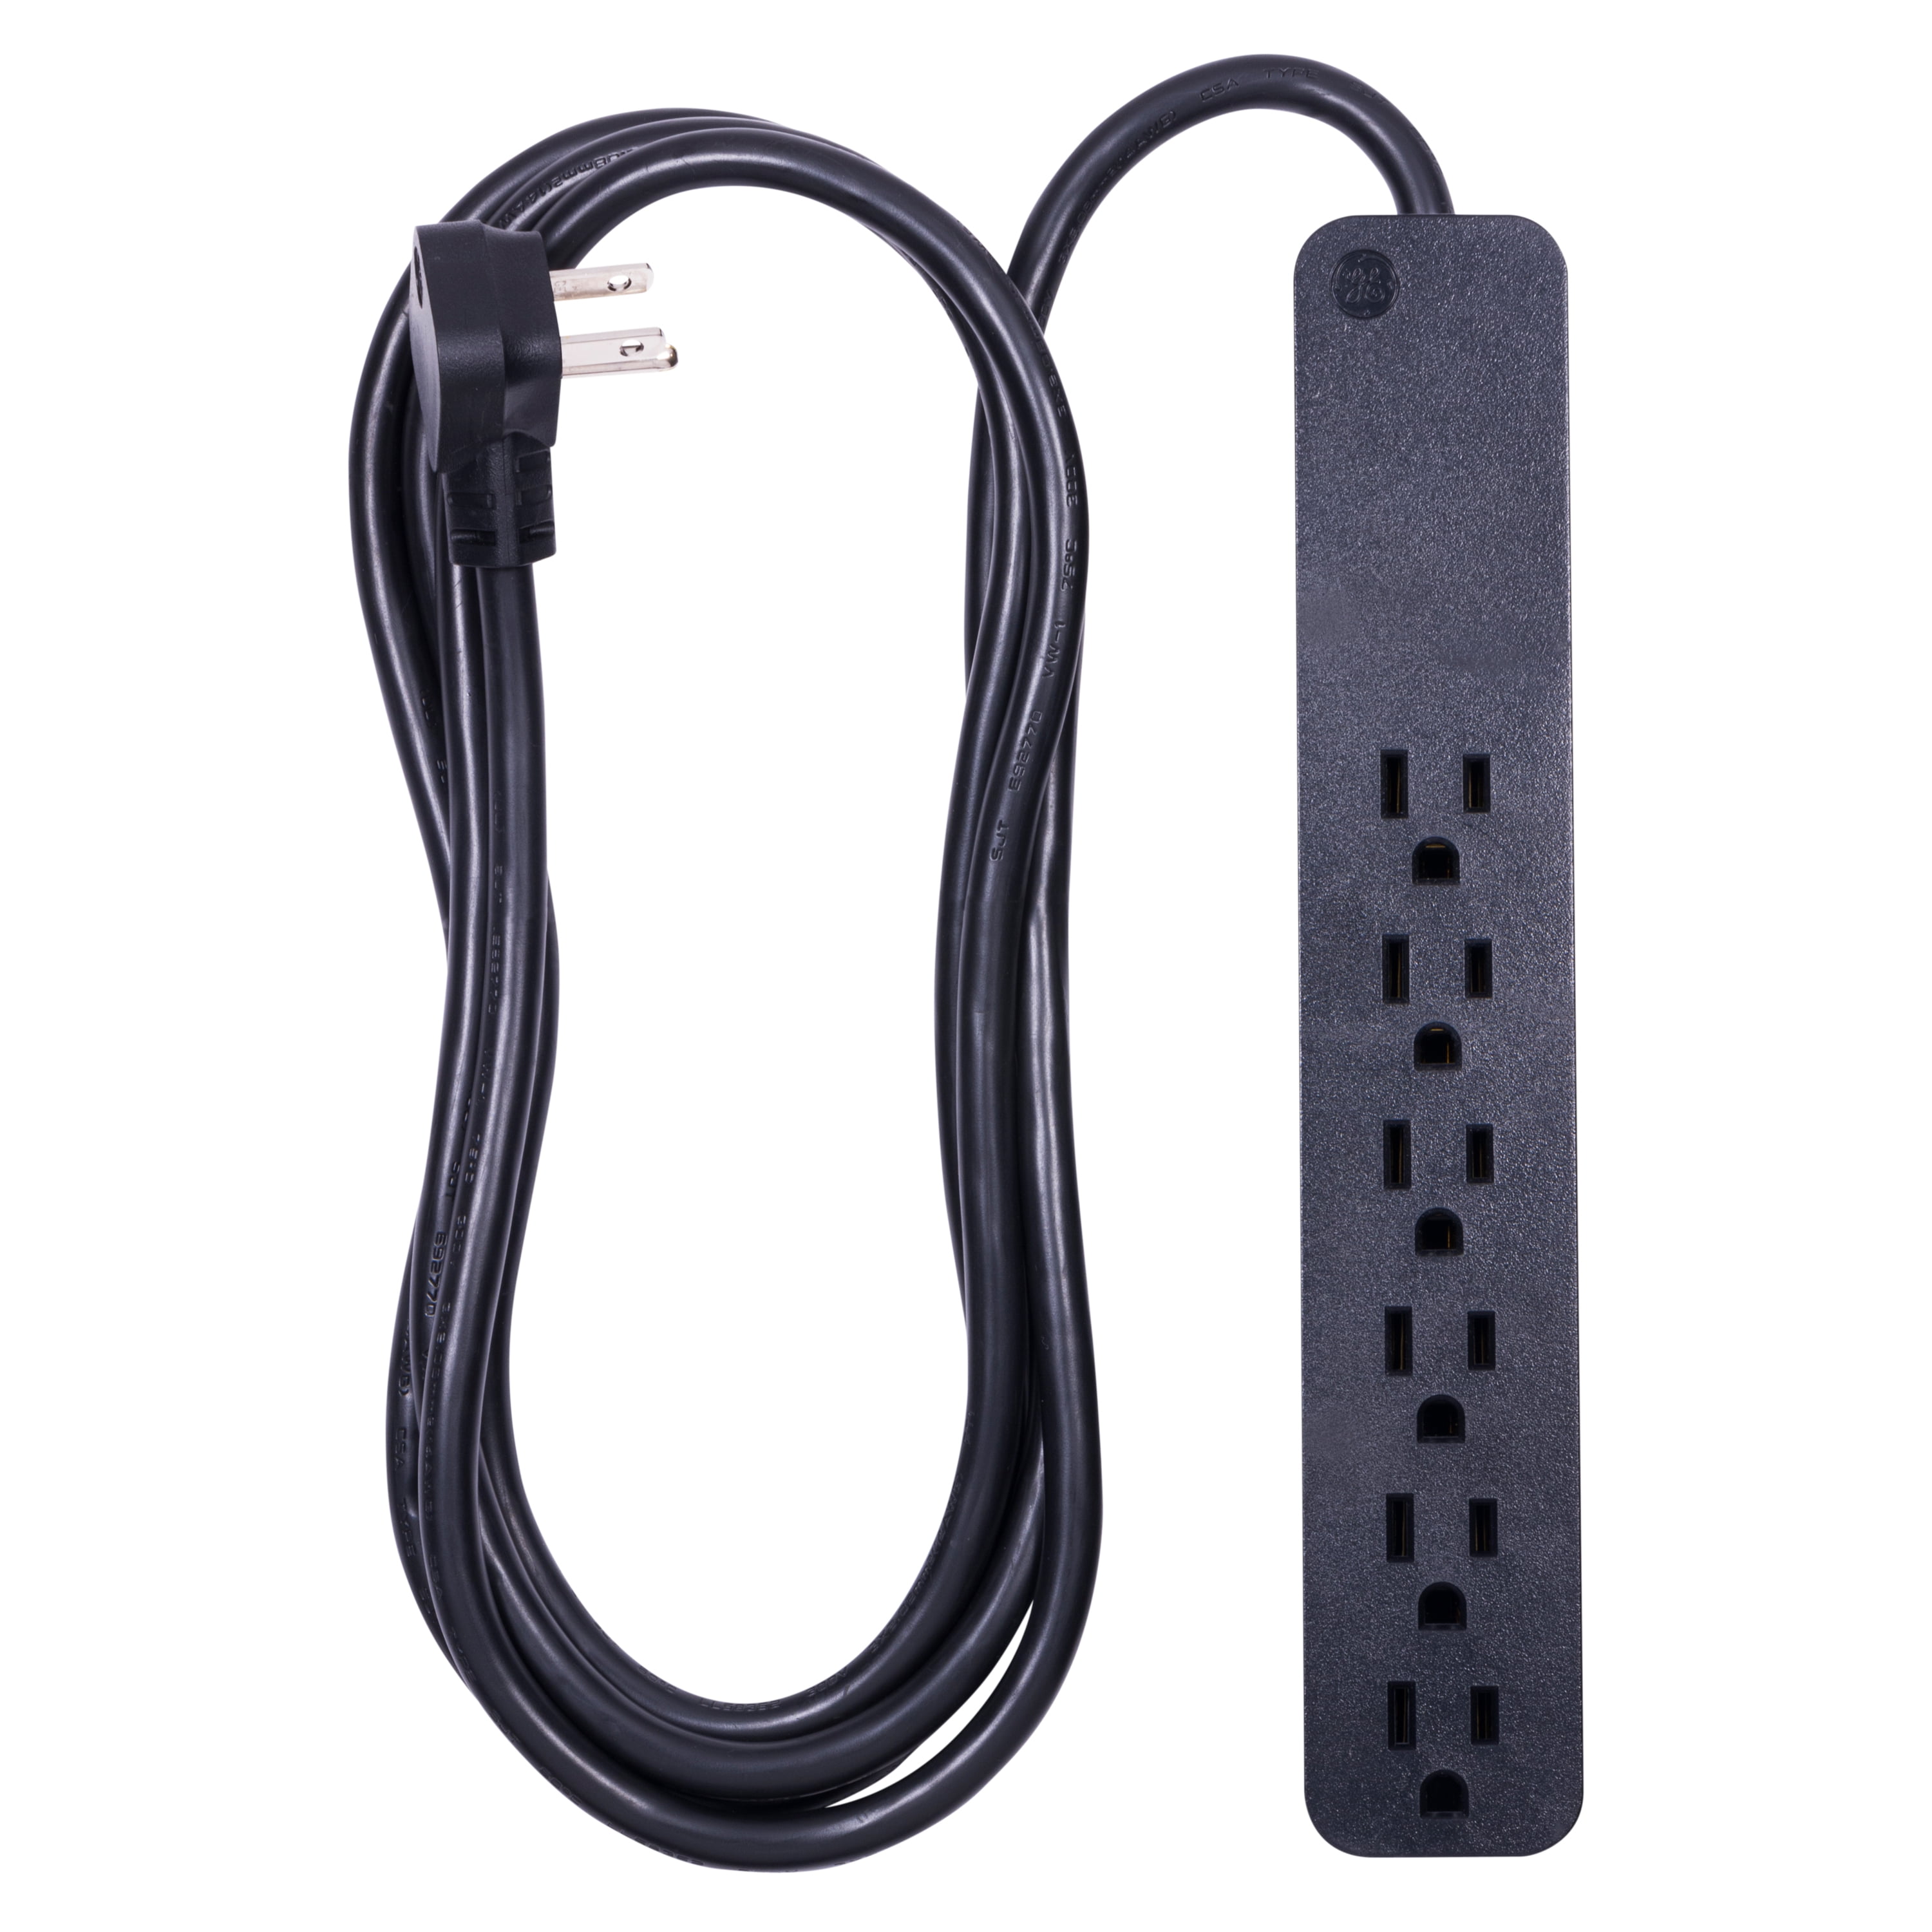 GE Pro 6-Outlet Power Strip Surge Protector, 8ft. Power Cord - 37052